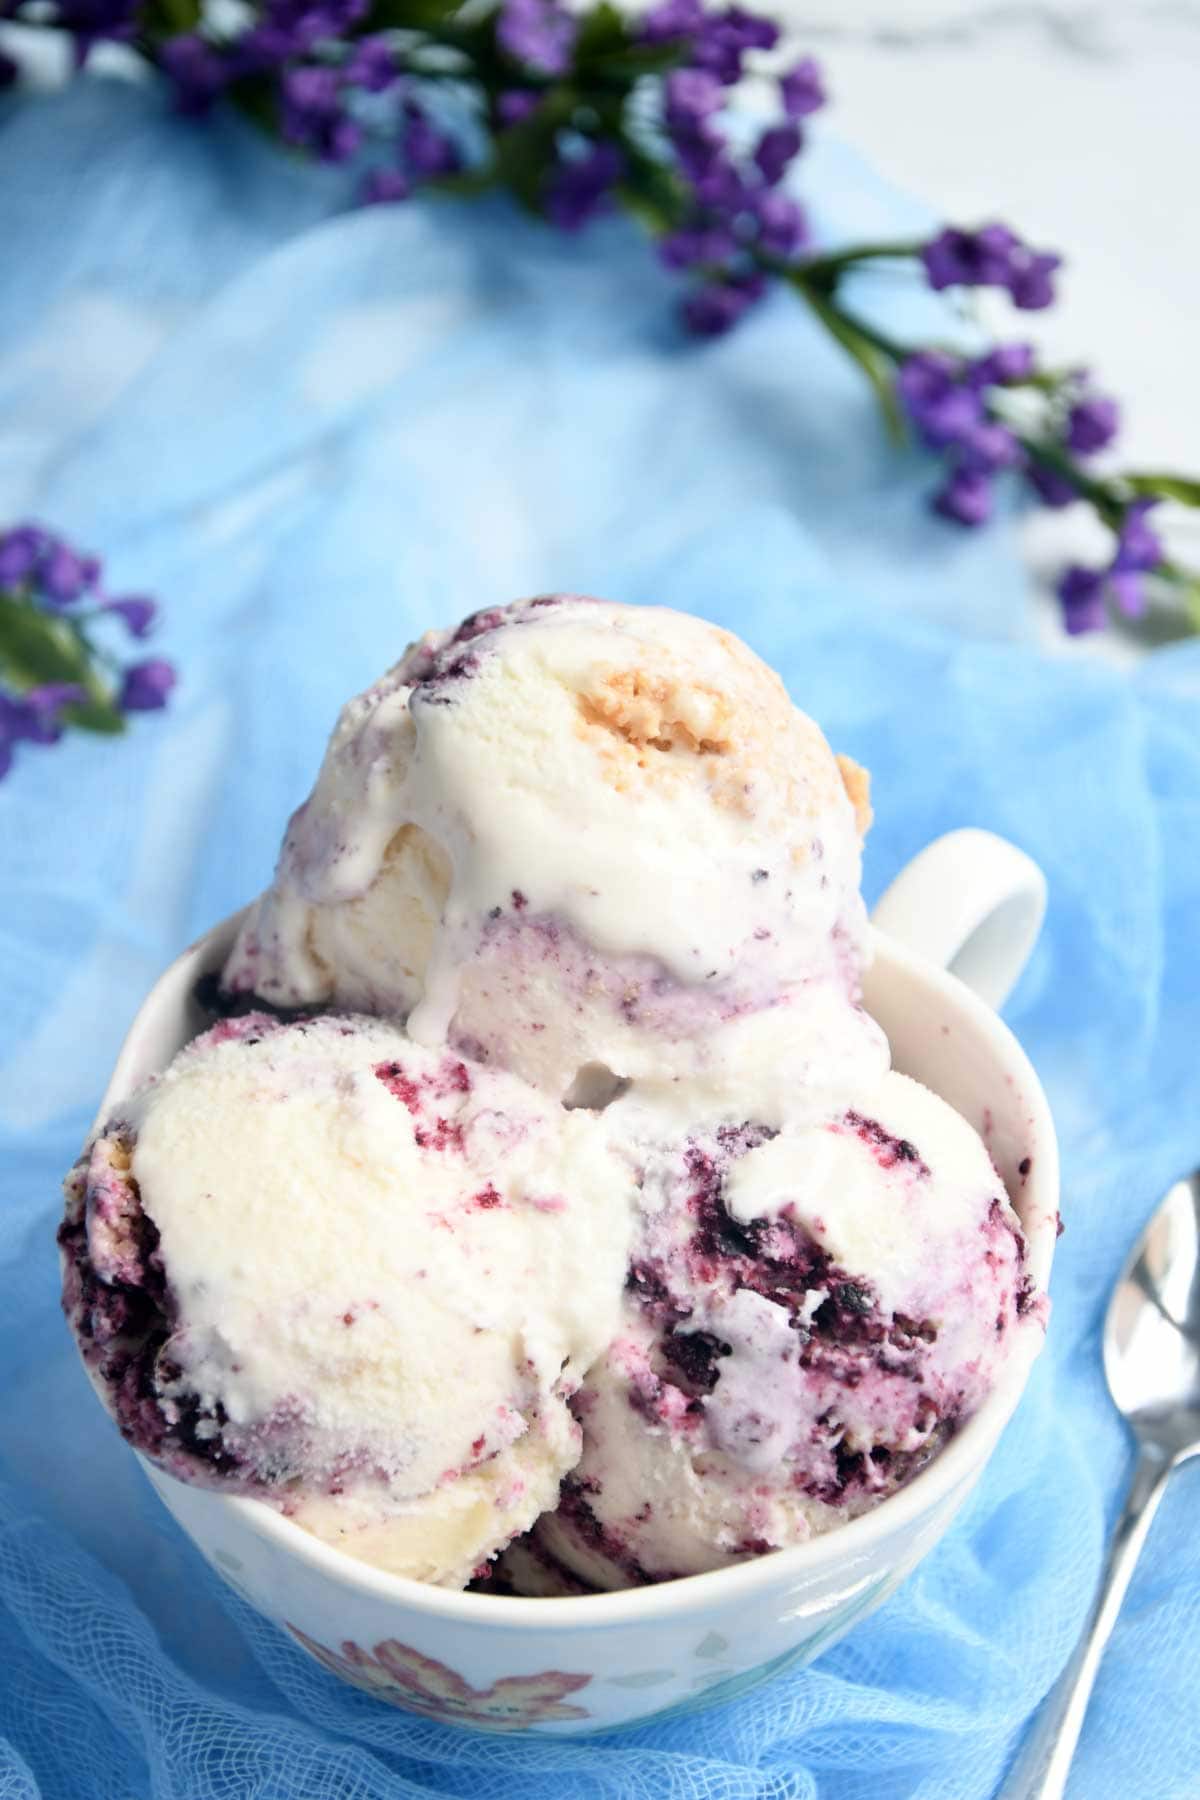 Blueberry cheesecake ice-cream scoops in a bowl.